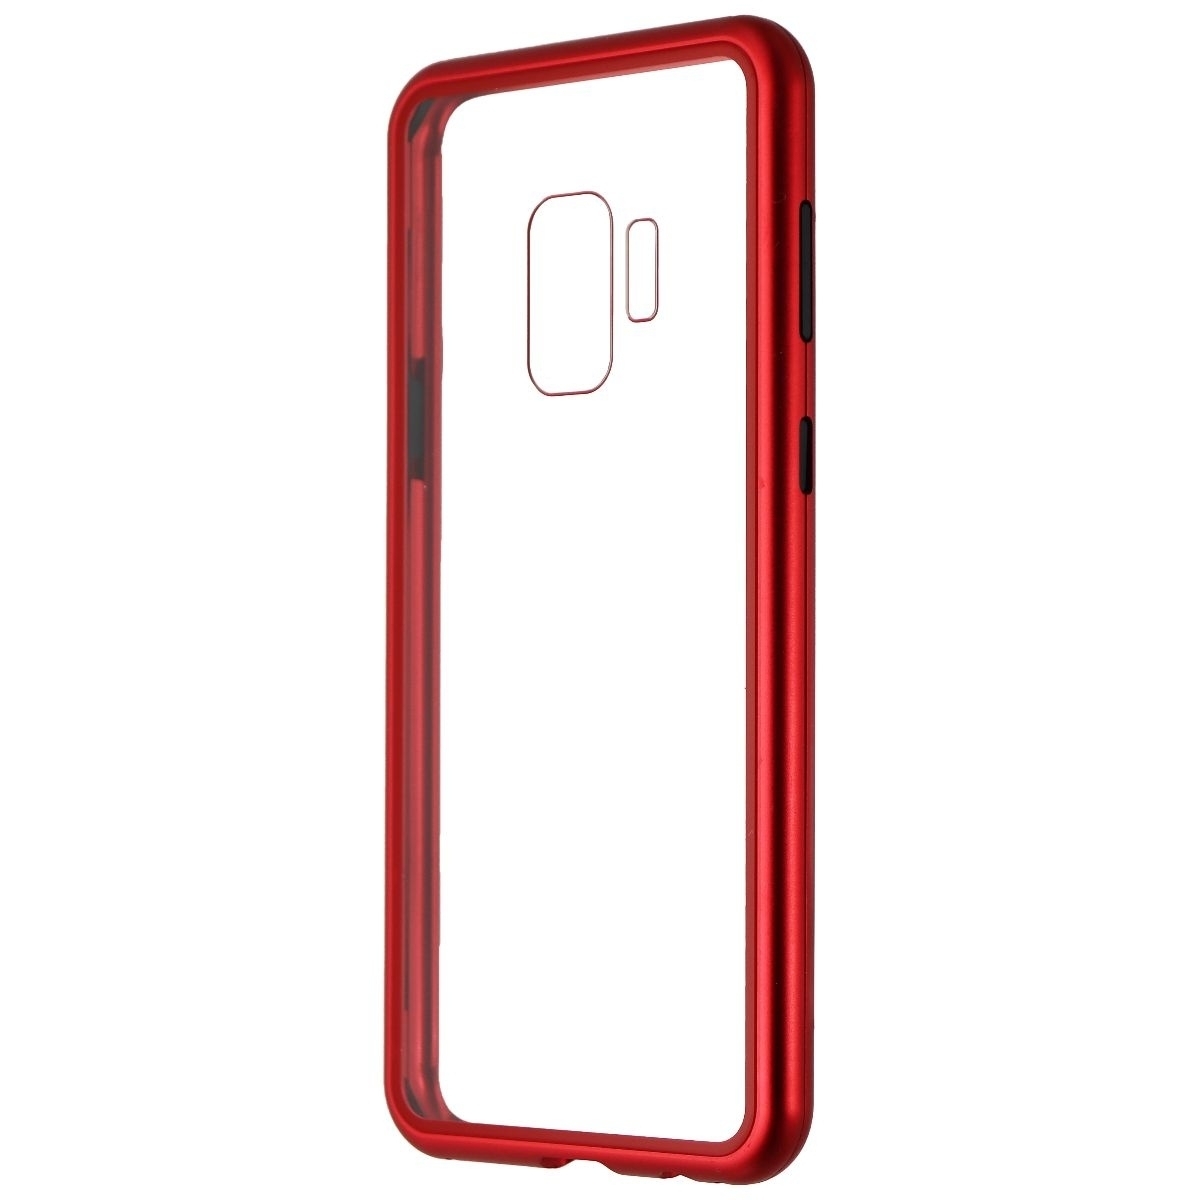 Zore Hybrid Glass Series Case For Samsung Galaxy S9 - Clear/Red